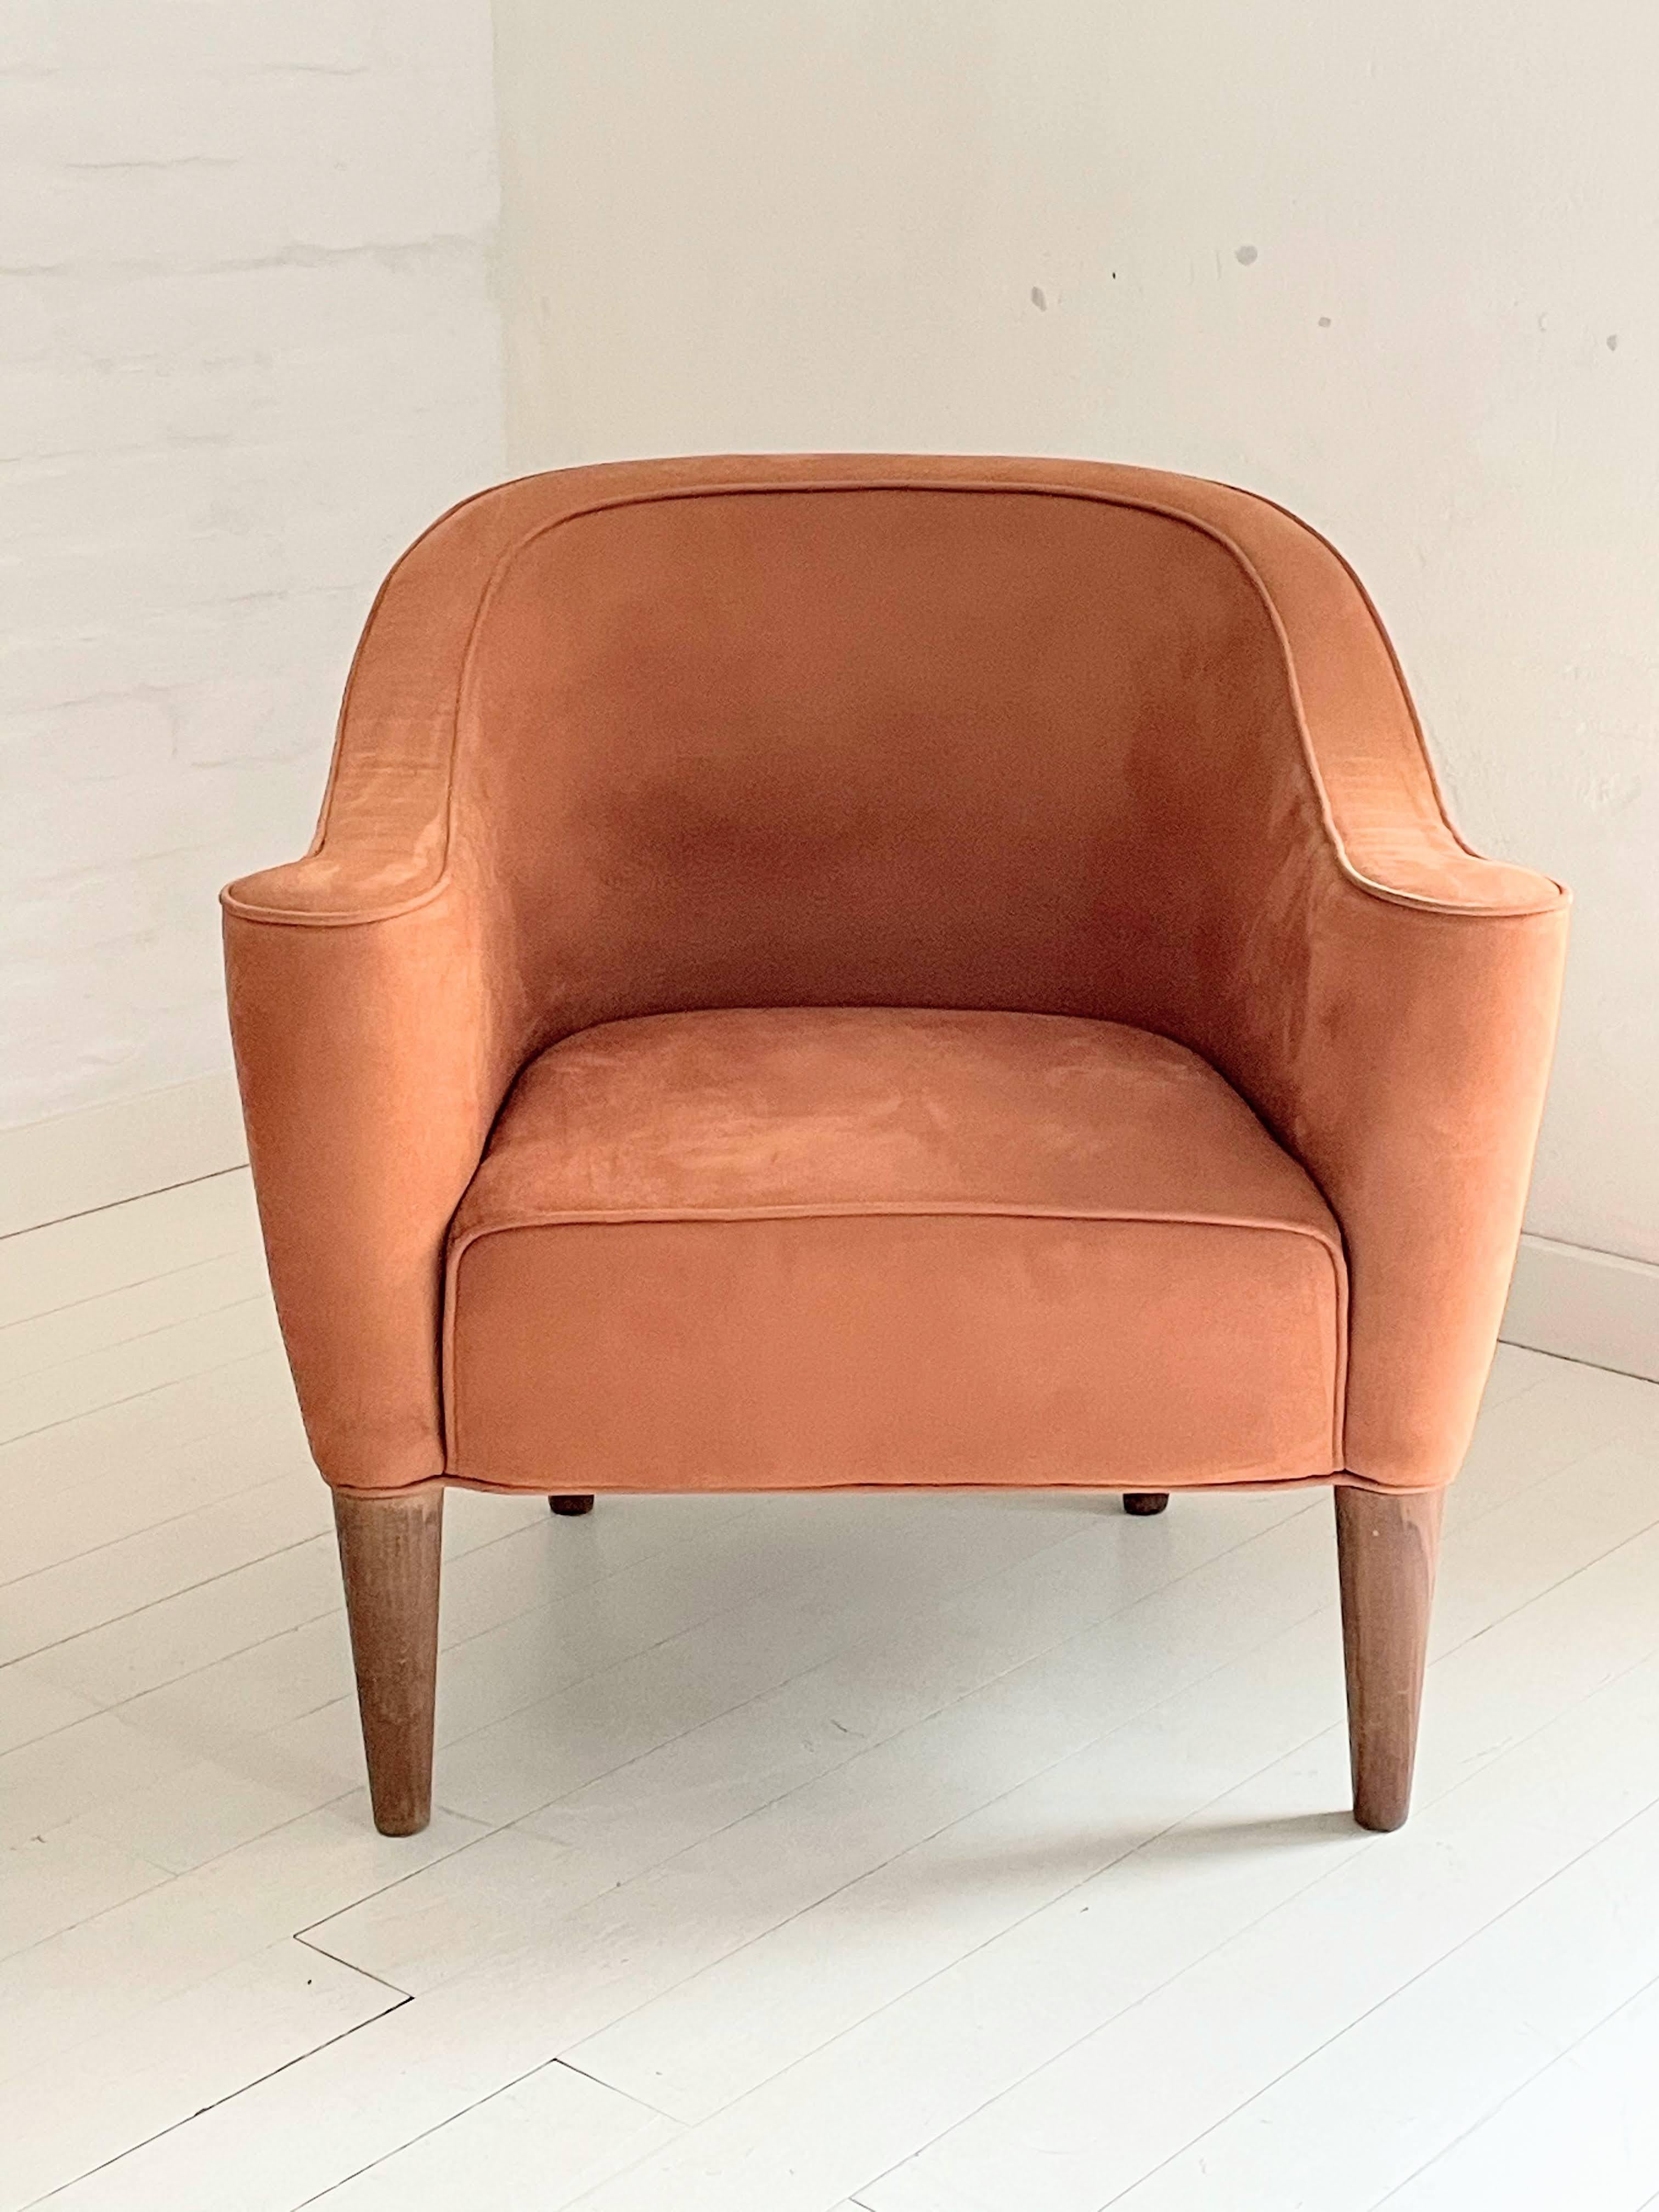 Josef Hoffmann Wiener Werkstatte style tub chairs. Manufactured in Italy, upholstered with velvet-textured terracotta fabric.